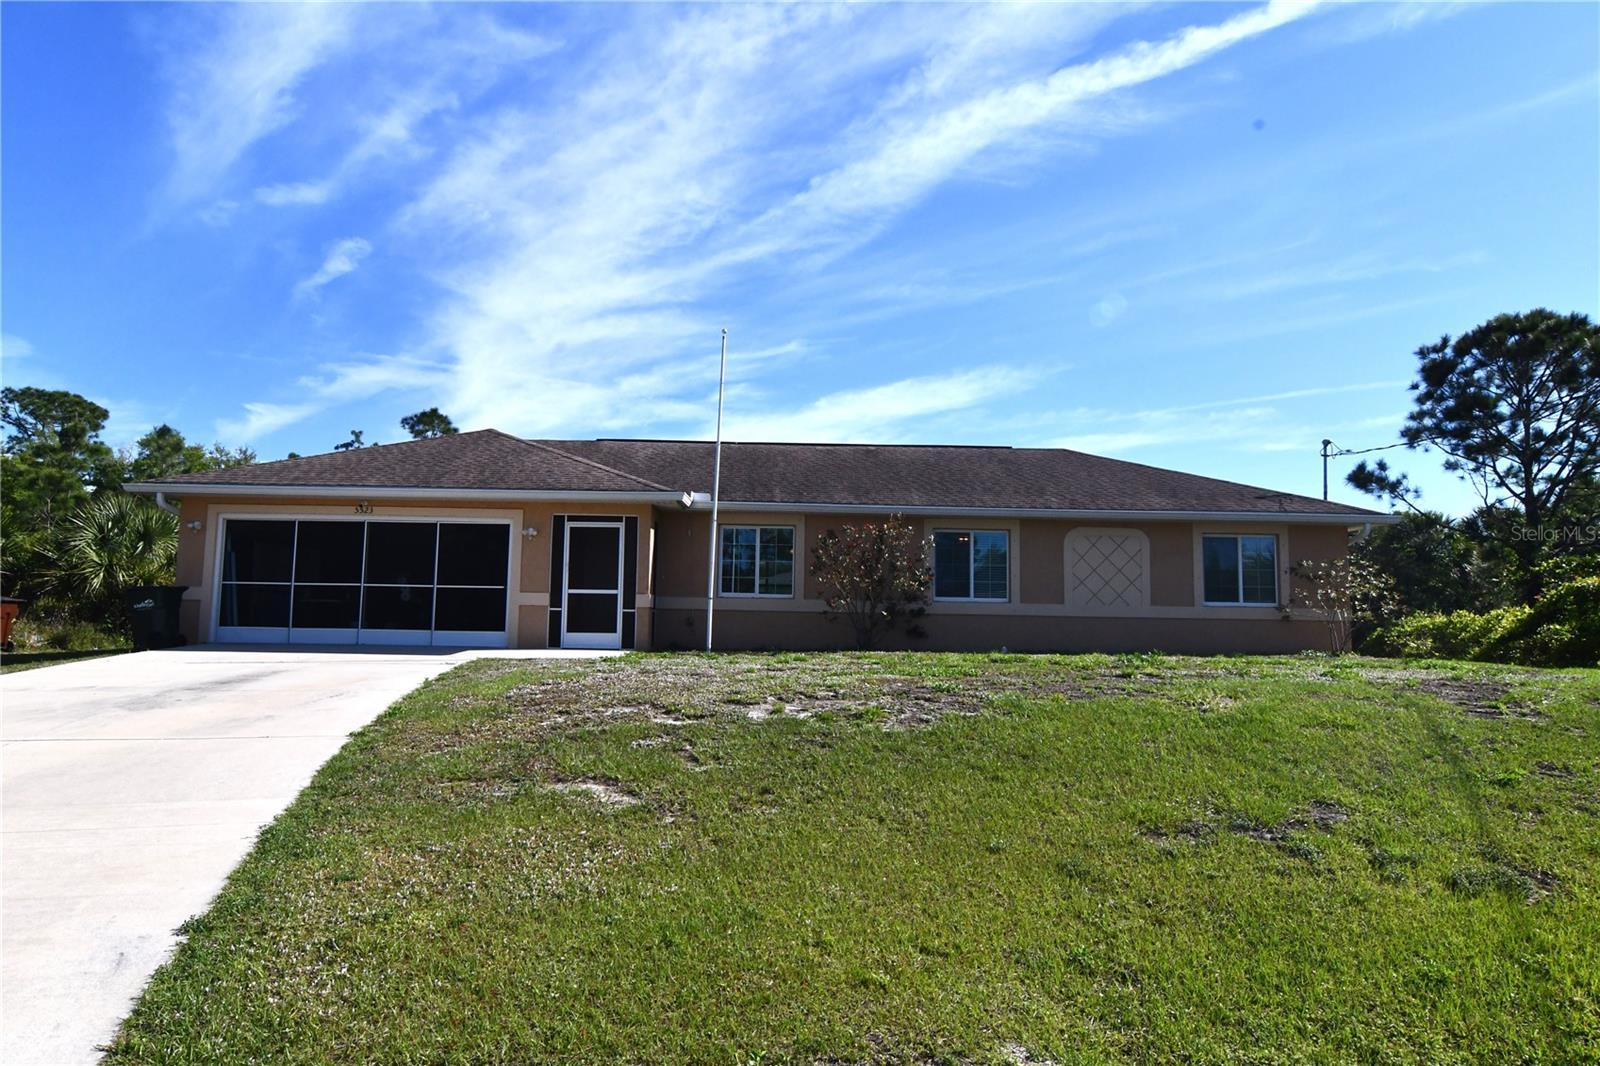 Photo one of 5523 Surprise Rd North Port FL 34288 | MLS C7489241